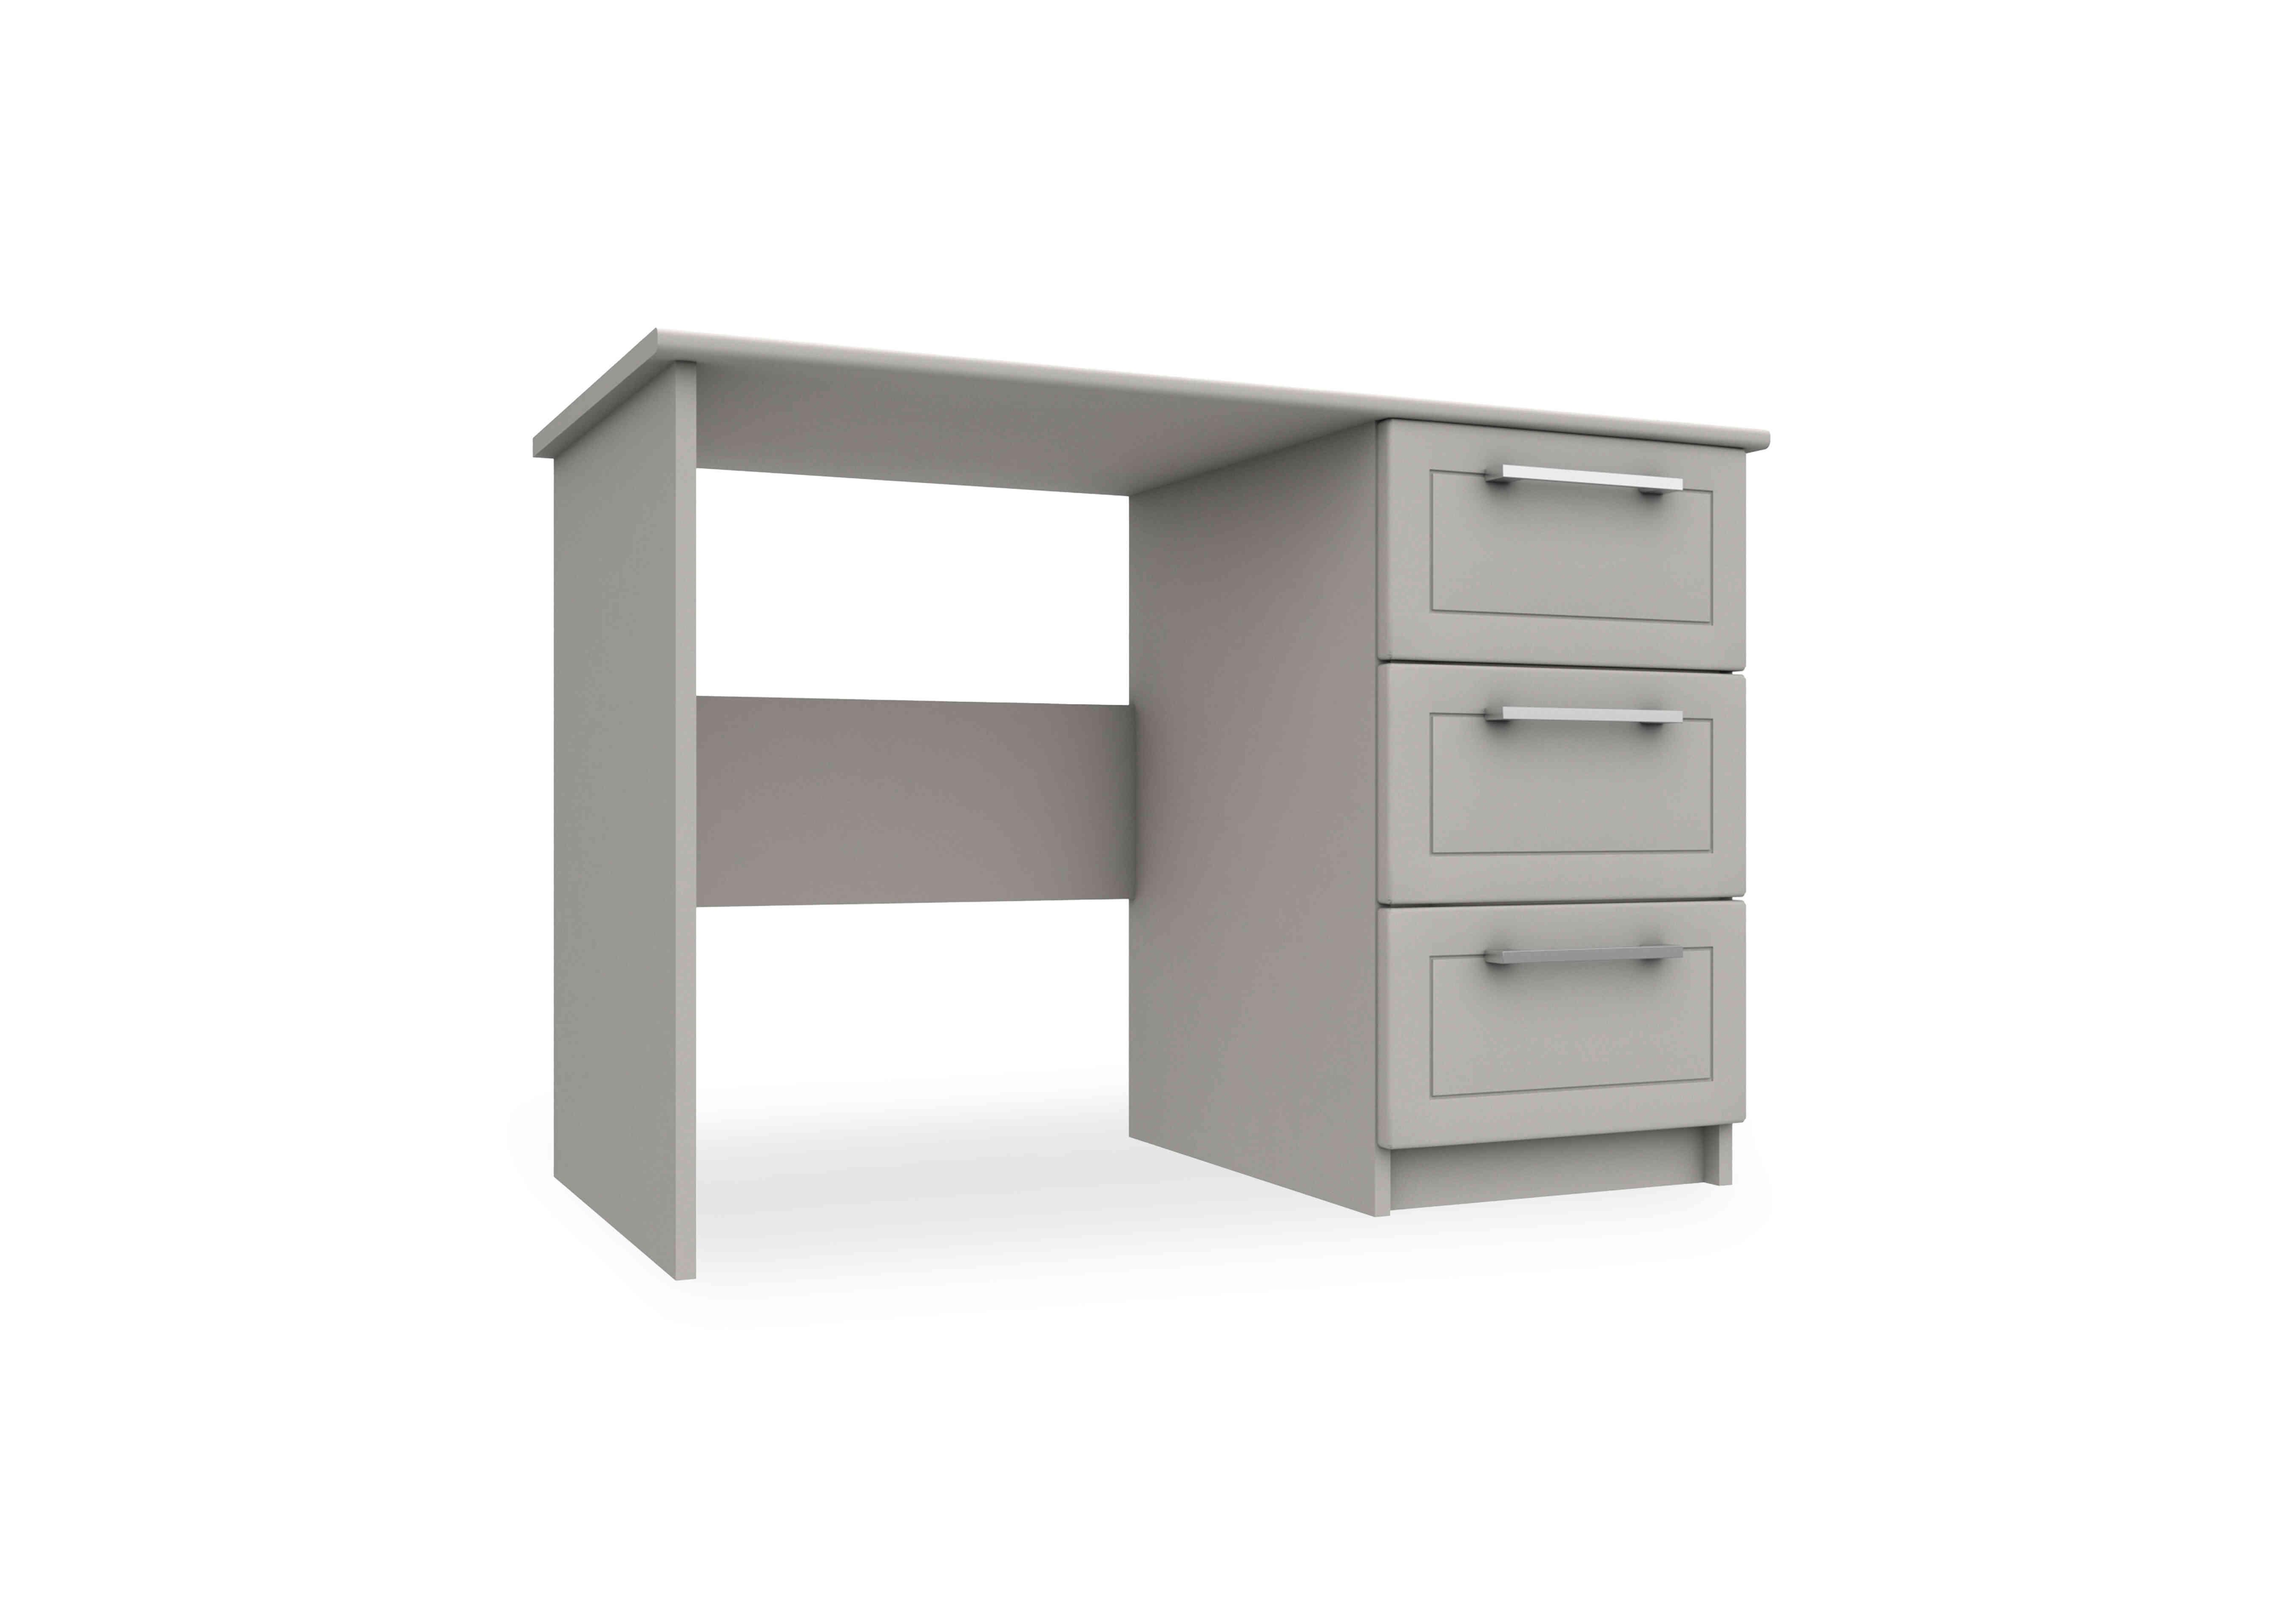 Bexley 3 Drawer Dressing Table in Light Grey Gloss on Furniture Village